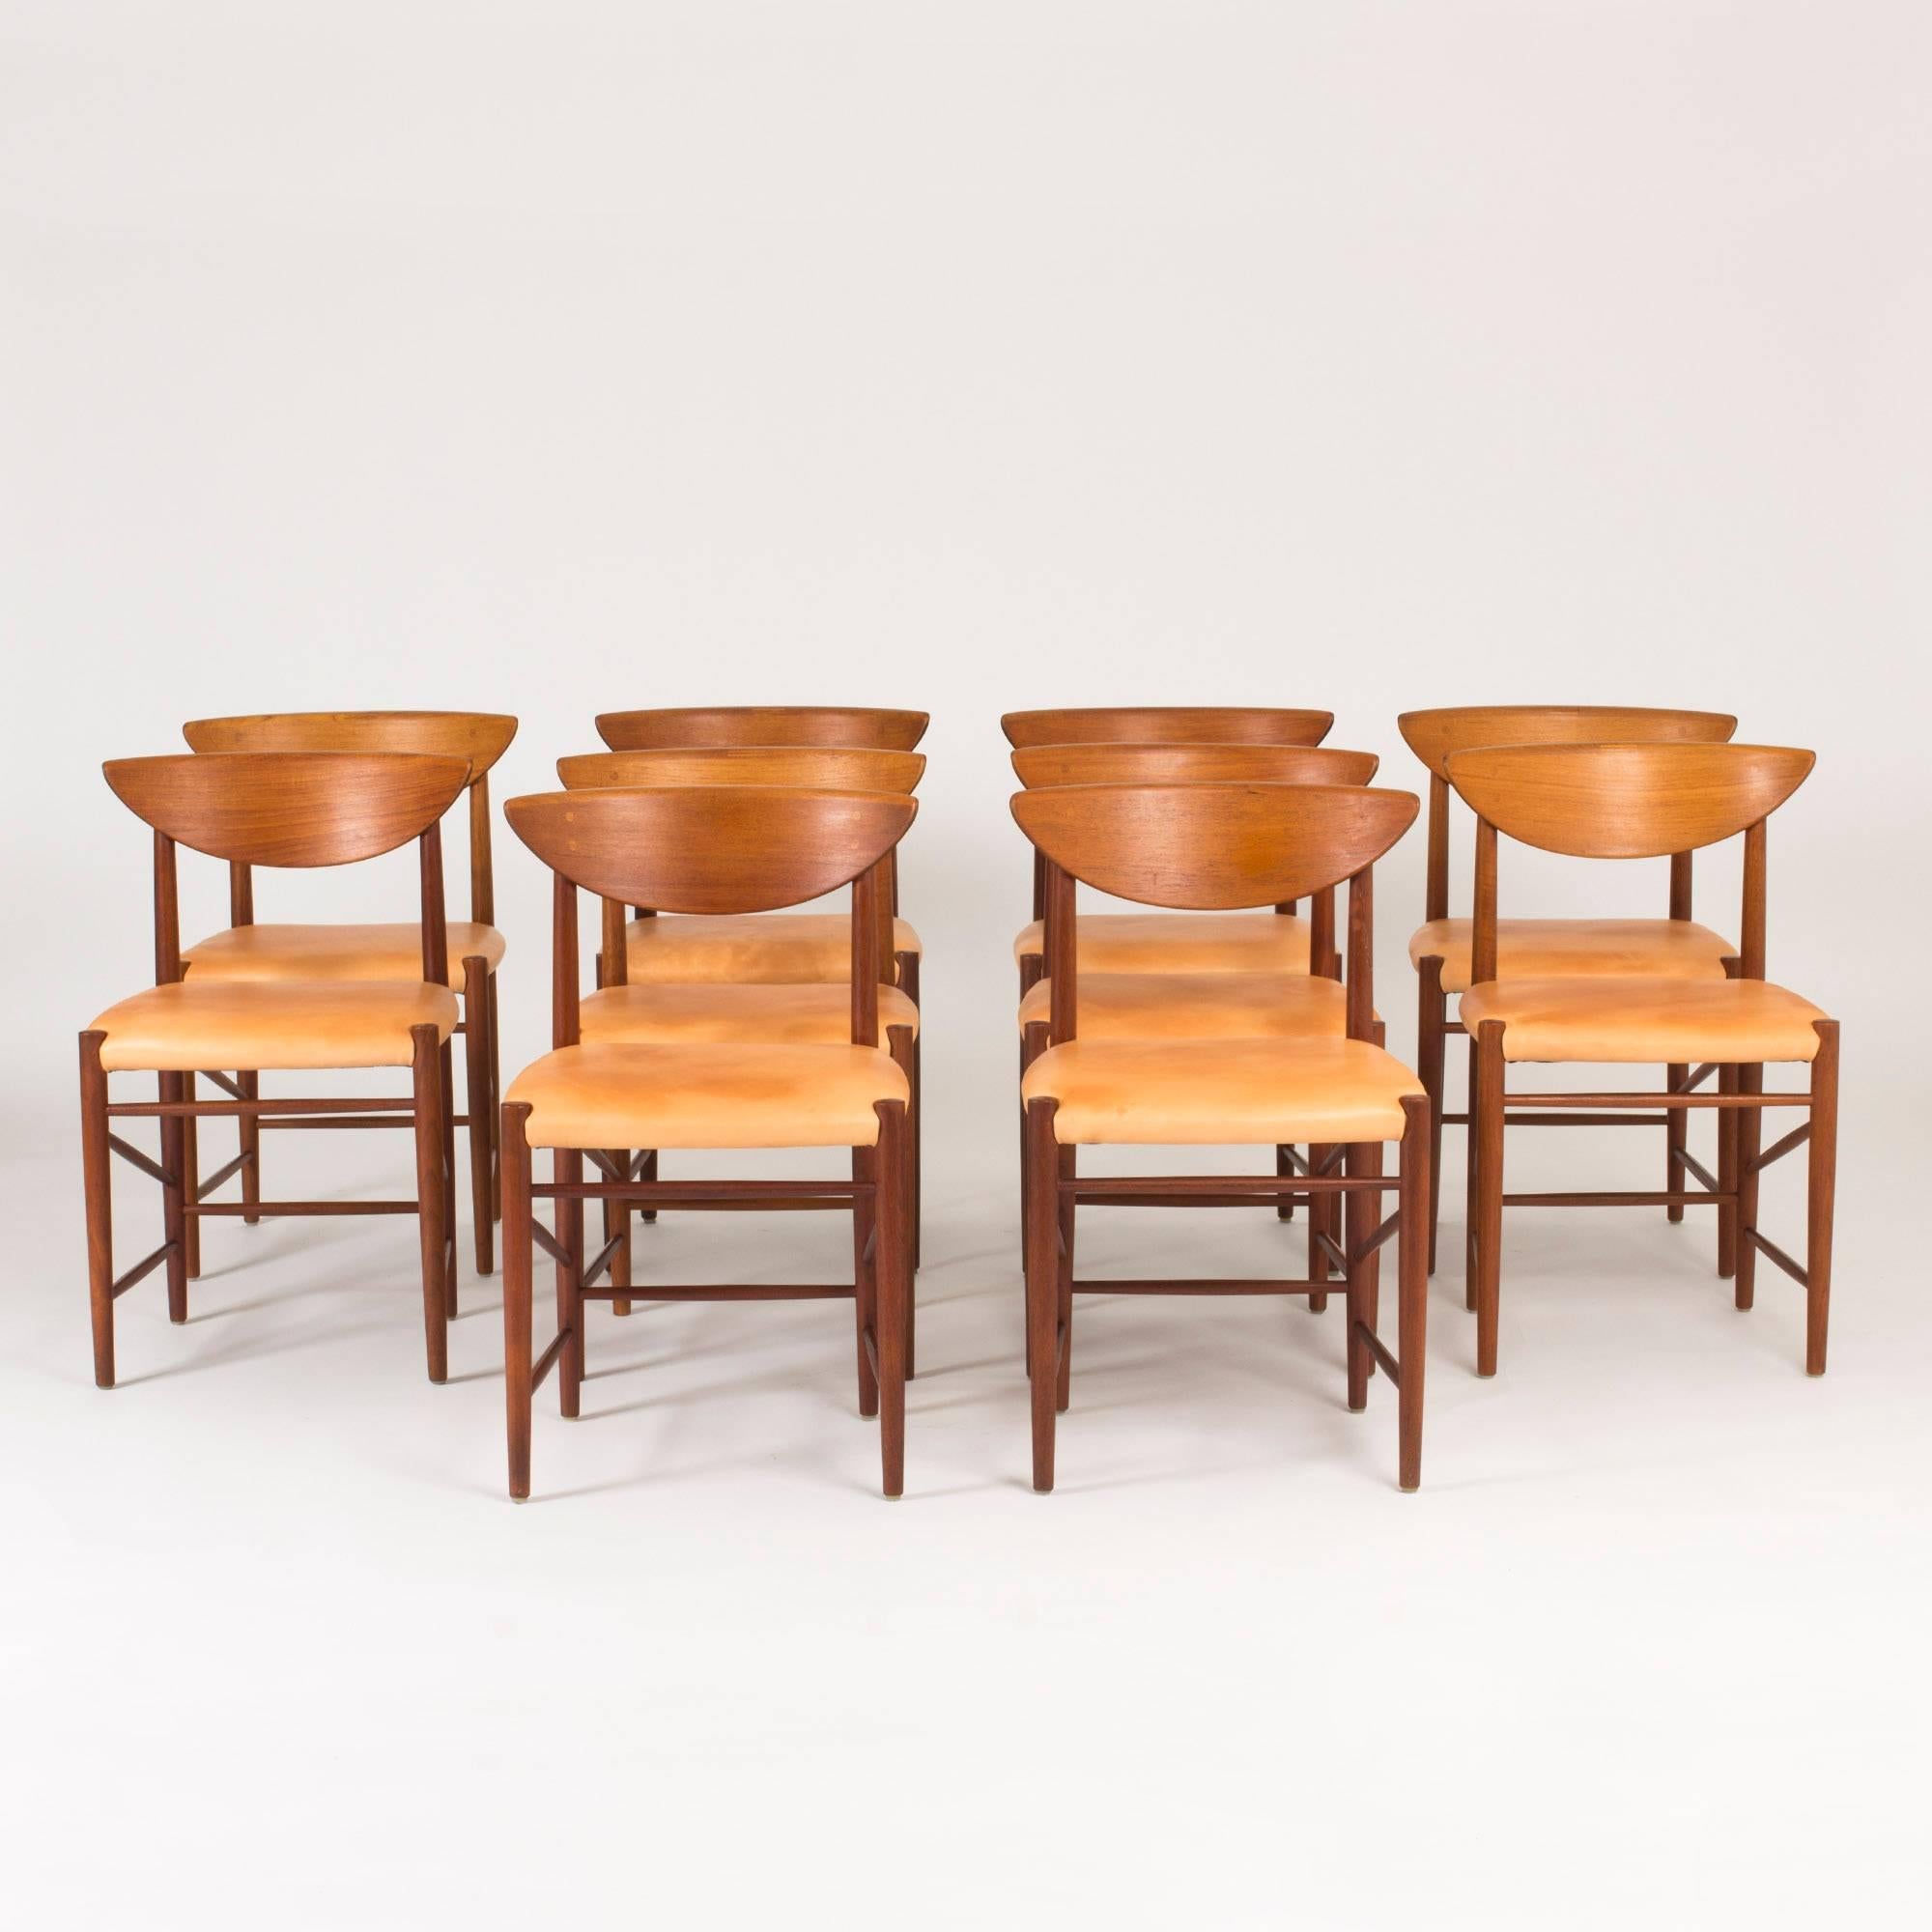 Set of ten remarkably elegant dining chairs by Peter Hvidt and Orla Mølgaard Nielsen, made in teak with nude leather seats. Slender legs and backrest with a curved upper edge and spheres covering the screw holes.
 